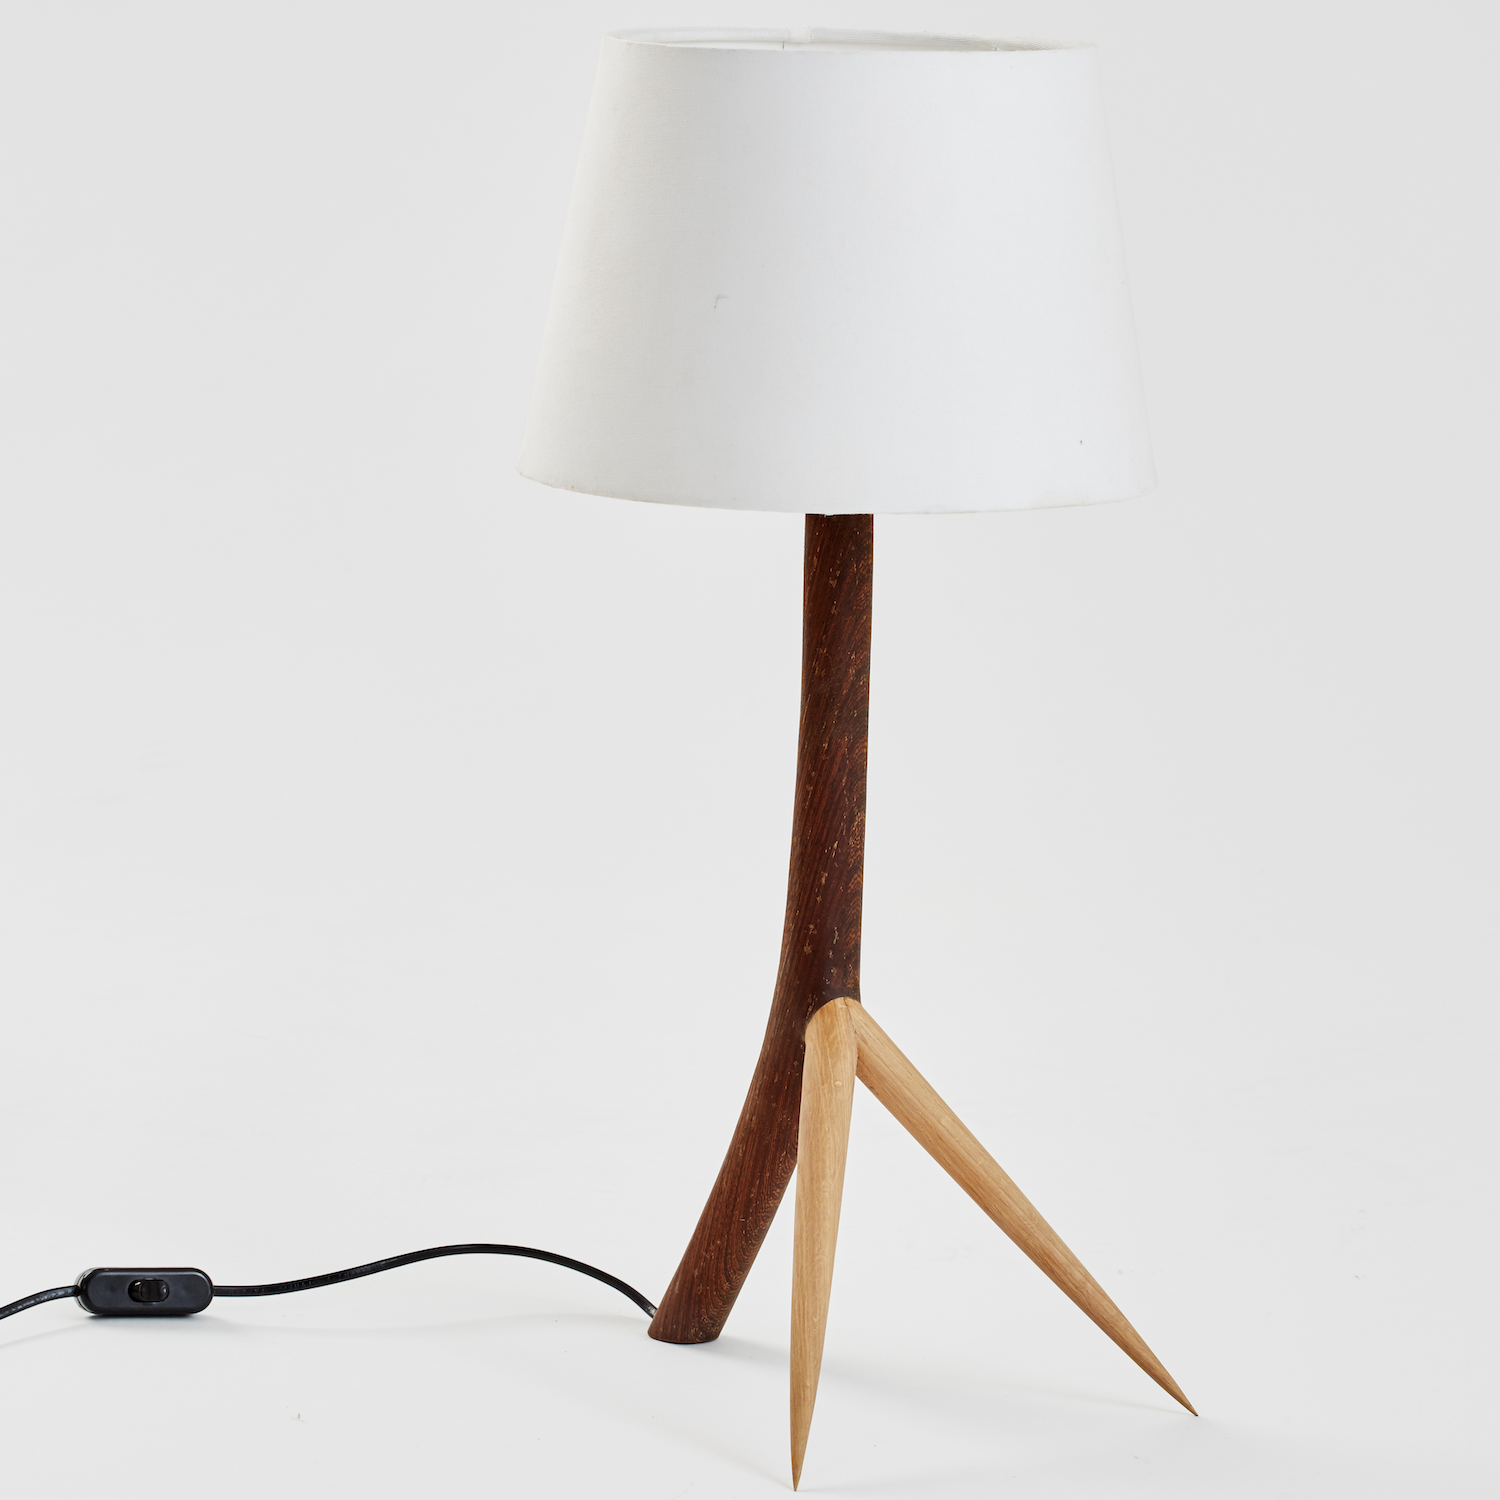 Thorn Table Lamp by Meyer Von Wielligh. This original table lamp with its tripod legs is inspired by the thorns of the iconic African thorn tree. This lamp has a white lamp shade.